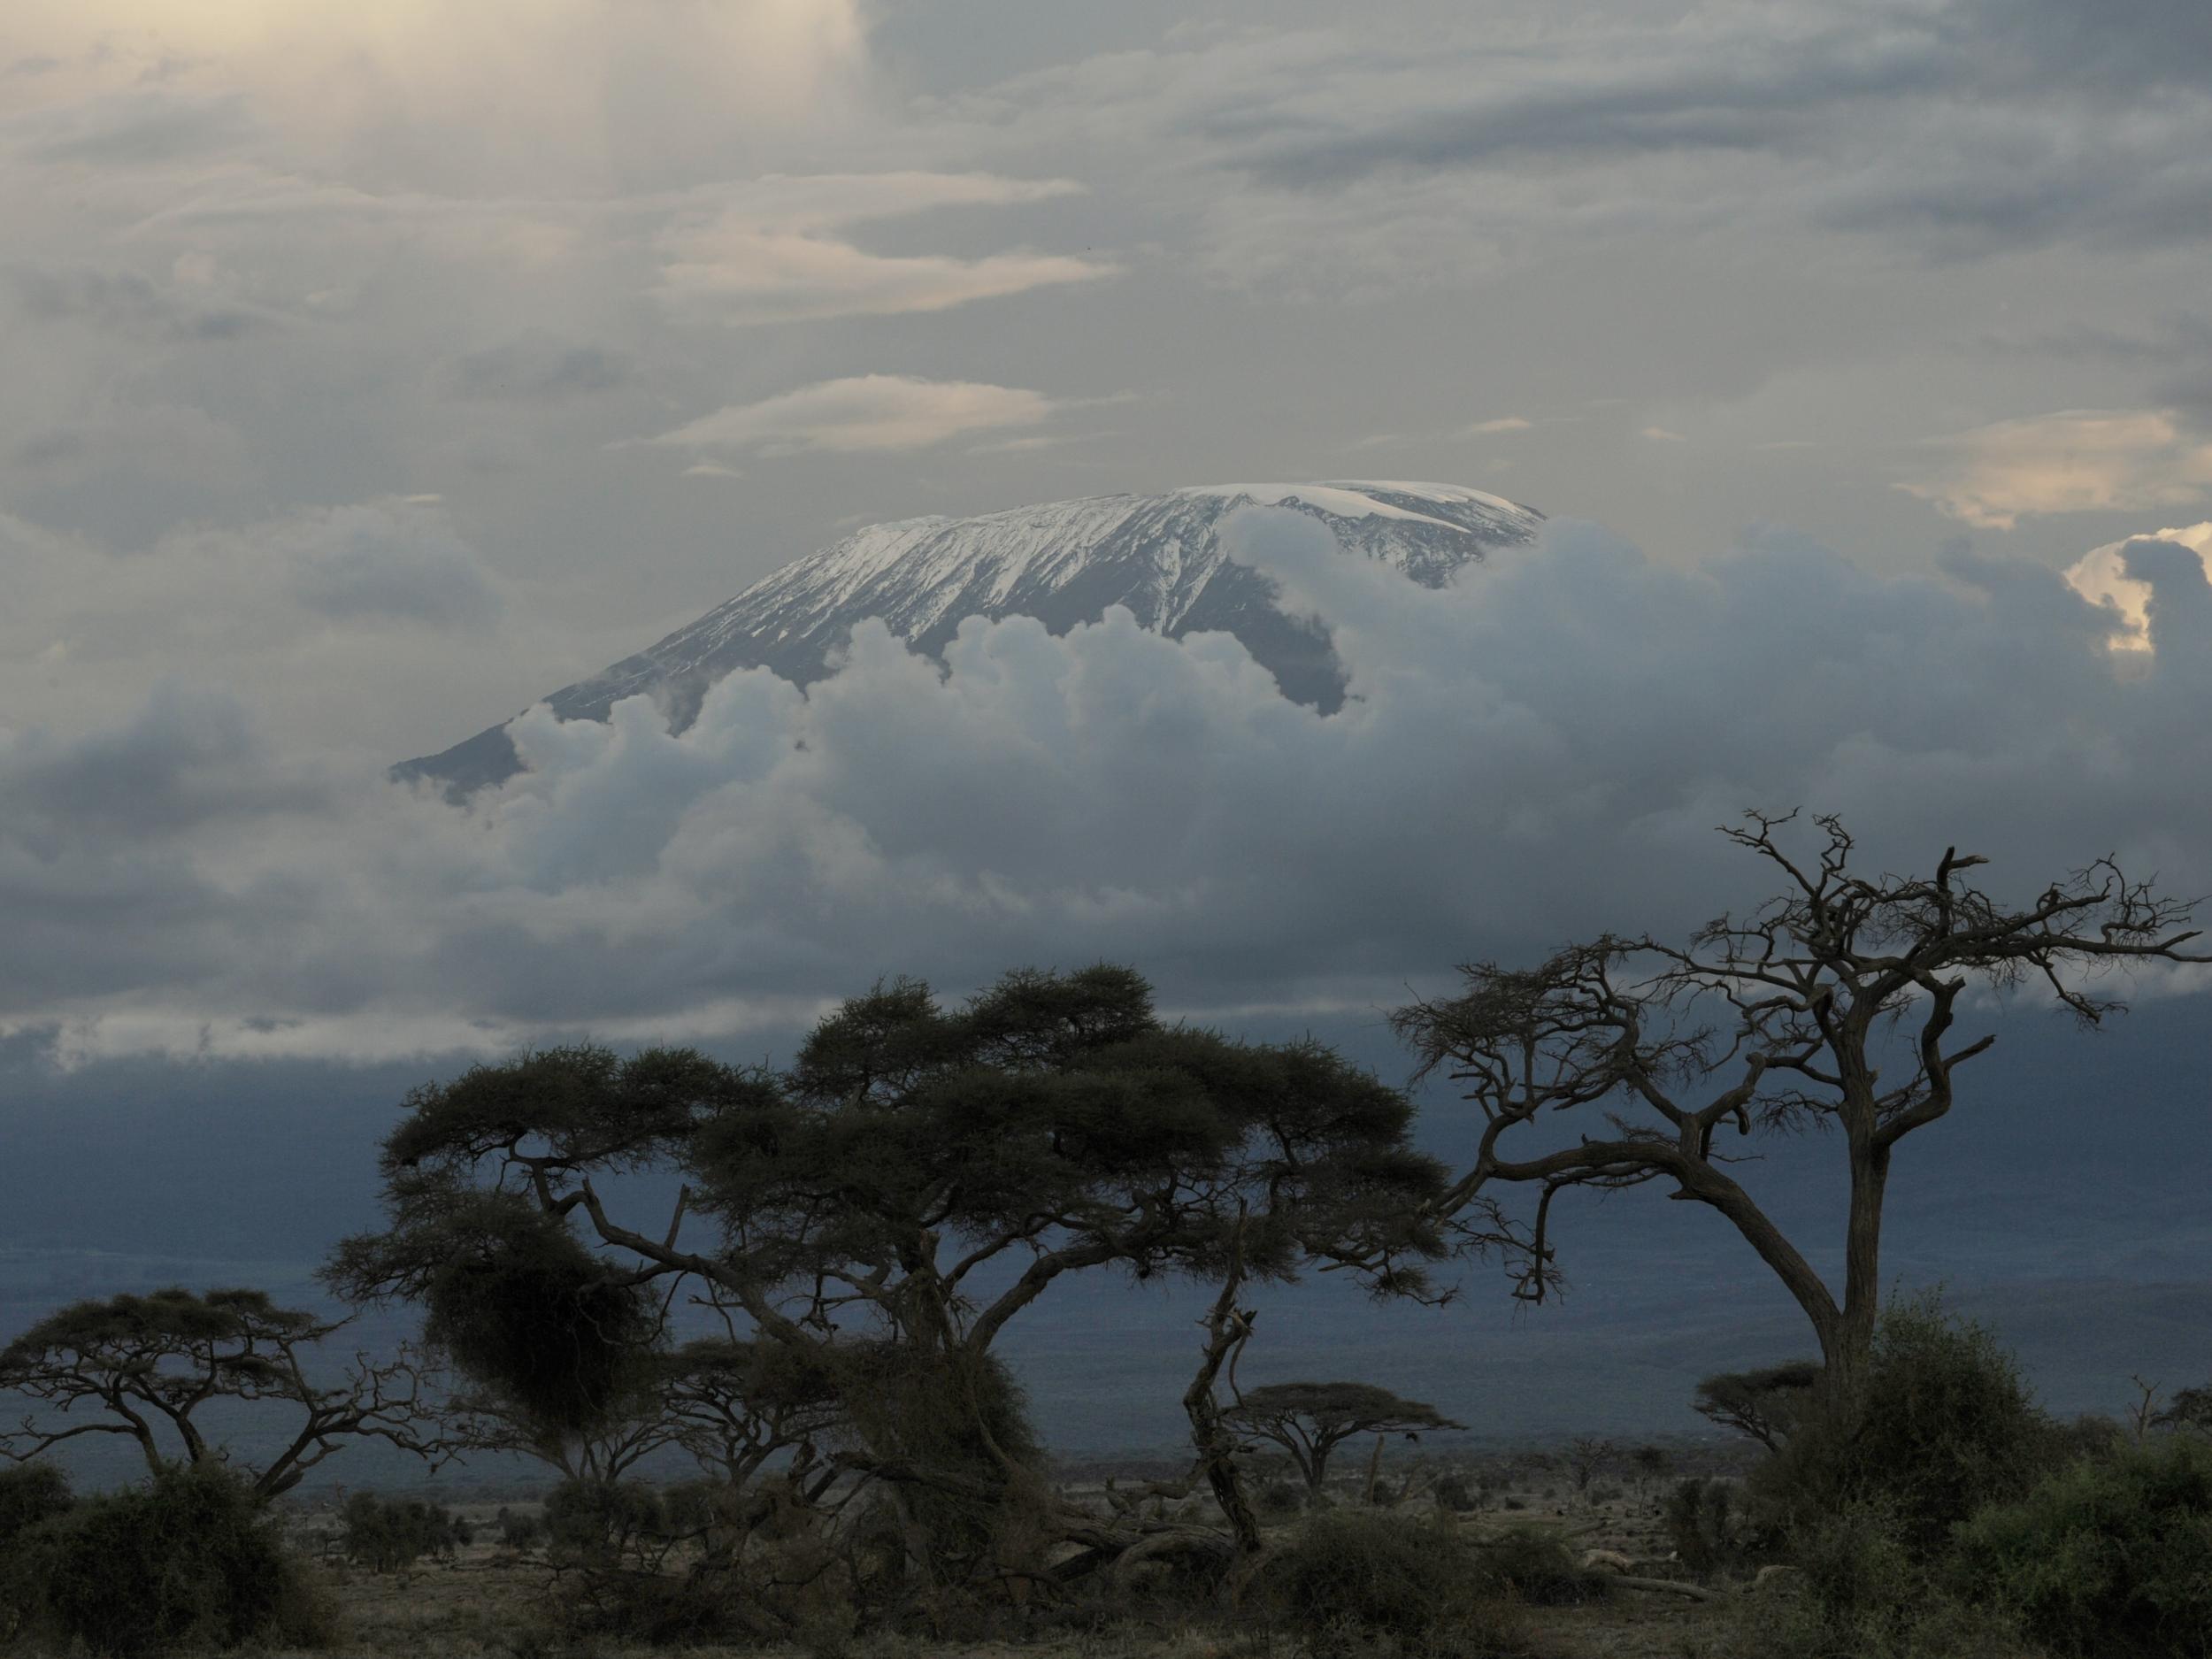 Africa's highest mountain, Mt. Kilimanjaro rises over clouds late afternoon on December 13, 2009